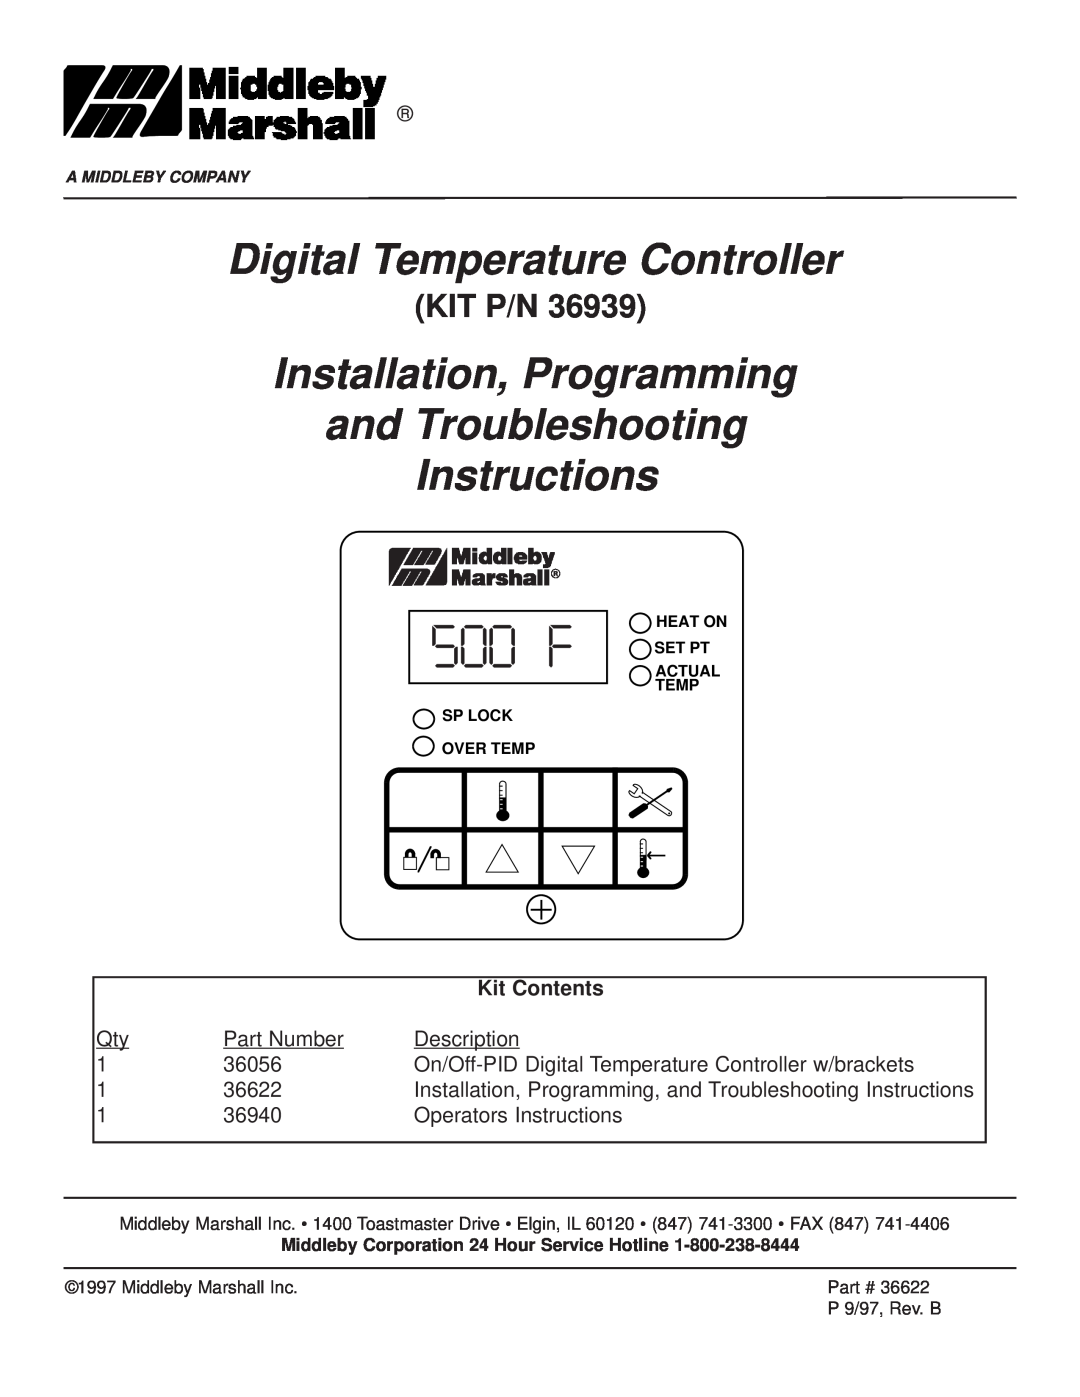 Middleby Marshall KIT P/N 36939 manual Kit Contents, 500 F, Digital Temperature Controller, Instructions, Kit P/N 